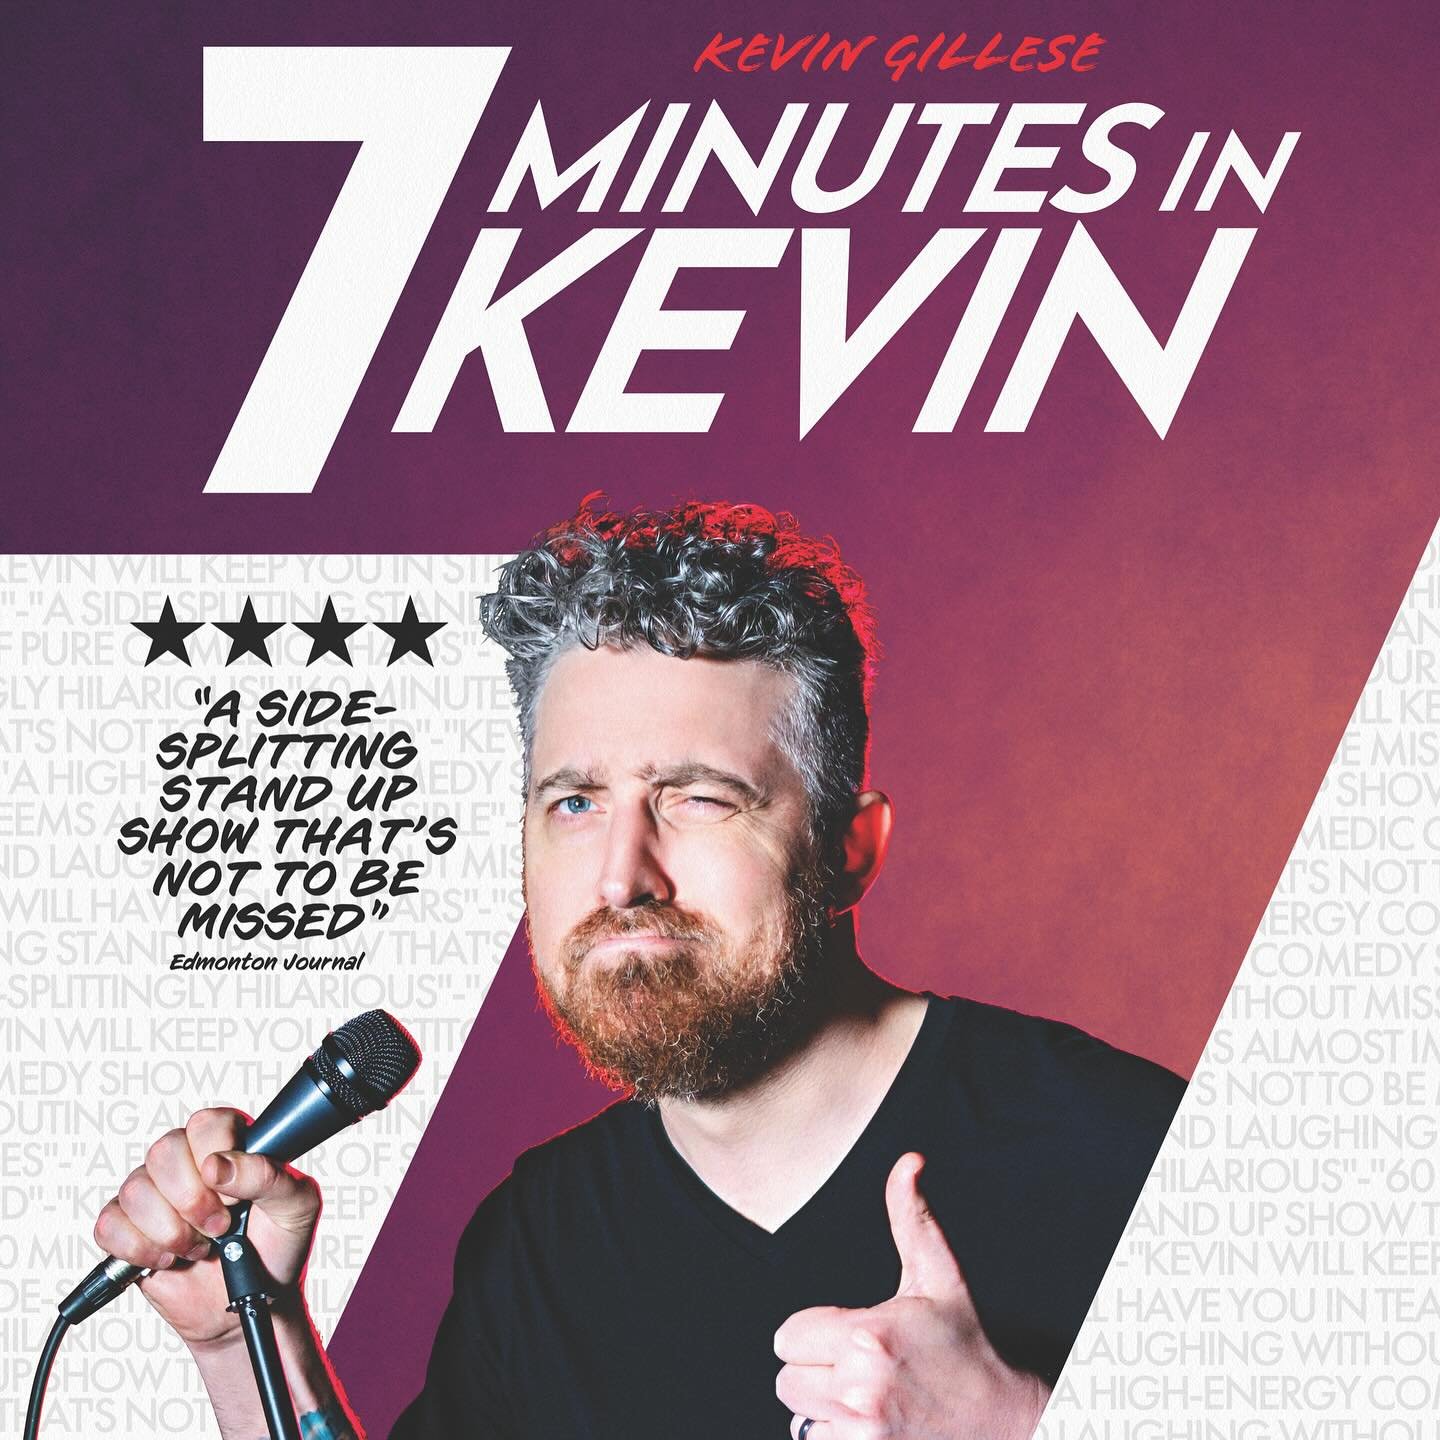 7 Minutes in Kevin premieres tonight! Starring @kgillese, this show is part storytelling, part stand-up, and all funny. Featuring original songs from @matthobbs and directed by @recovering.alison.rae, this show has received rave reviews at @edmontonf